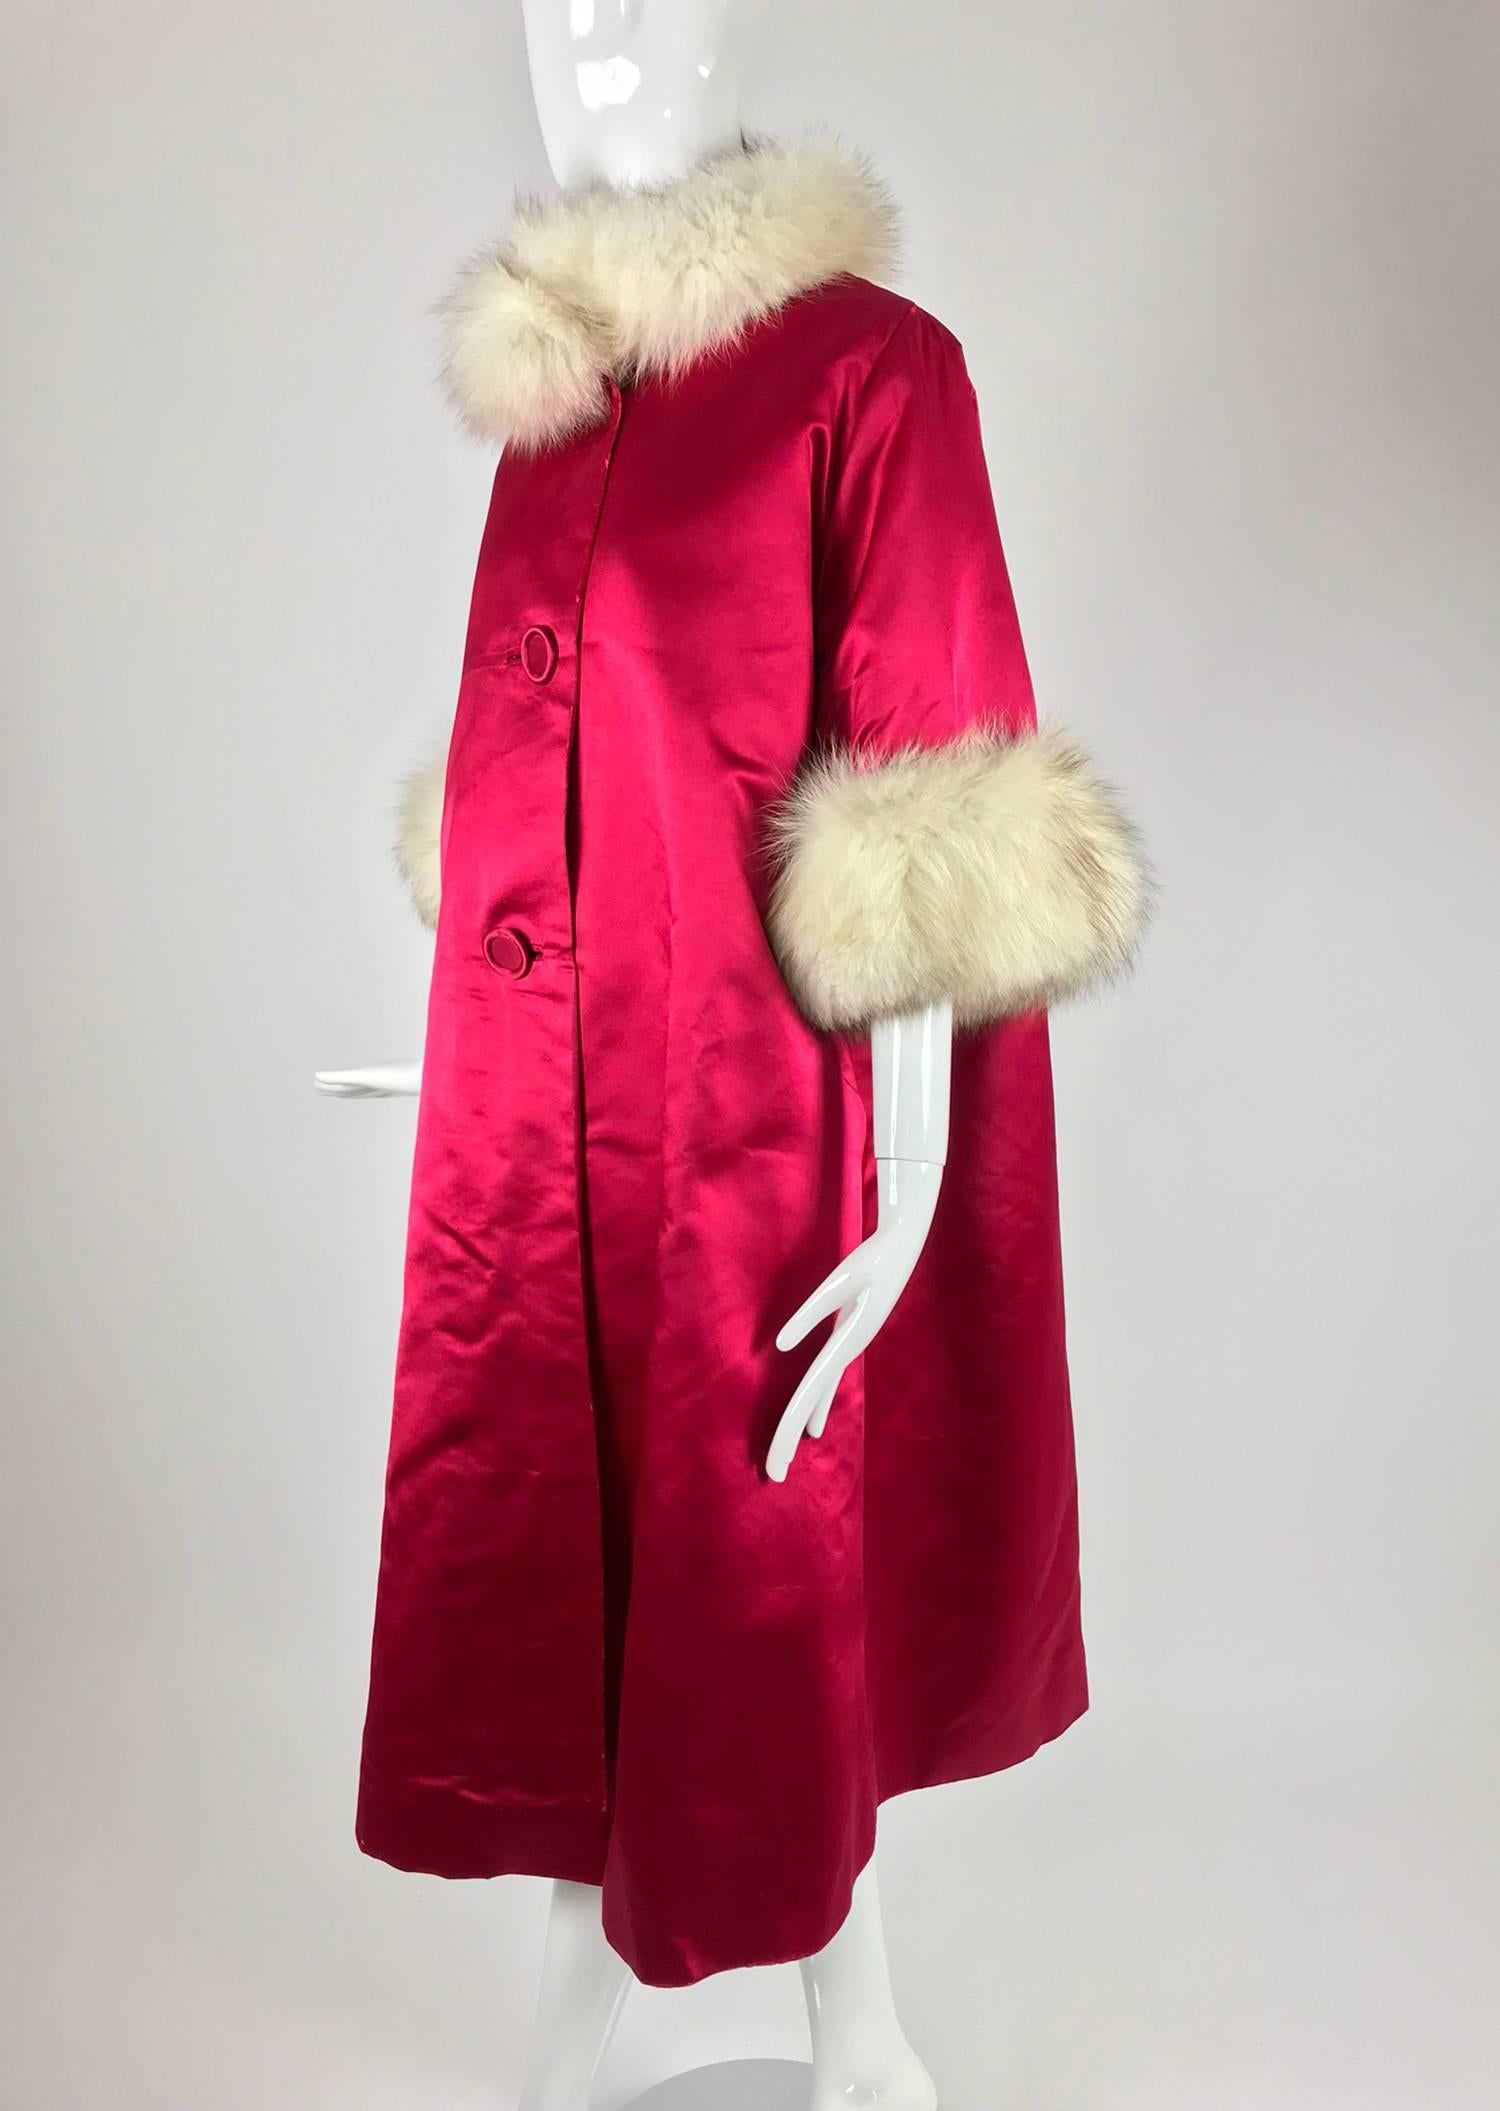 Vintage red silk slipper satin fur trimmed evening coat from the 1960s. Tent shape evening coat that flares at the hem. Off white fox fur collar. Bracelet length sleeves are trimmed in deep off white fox fur cuffs. The coat closes at the front with